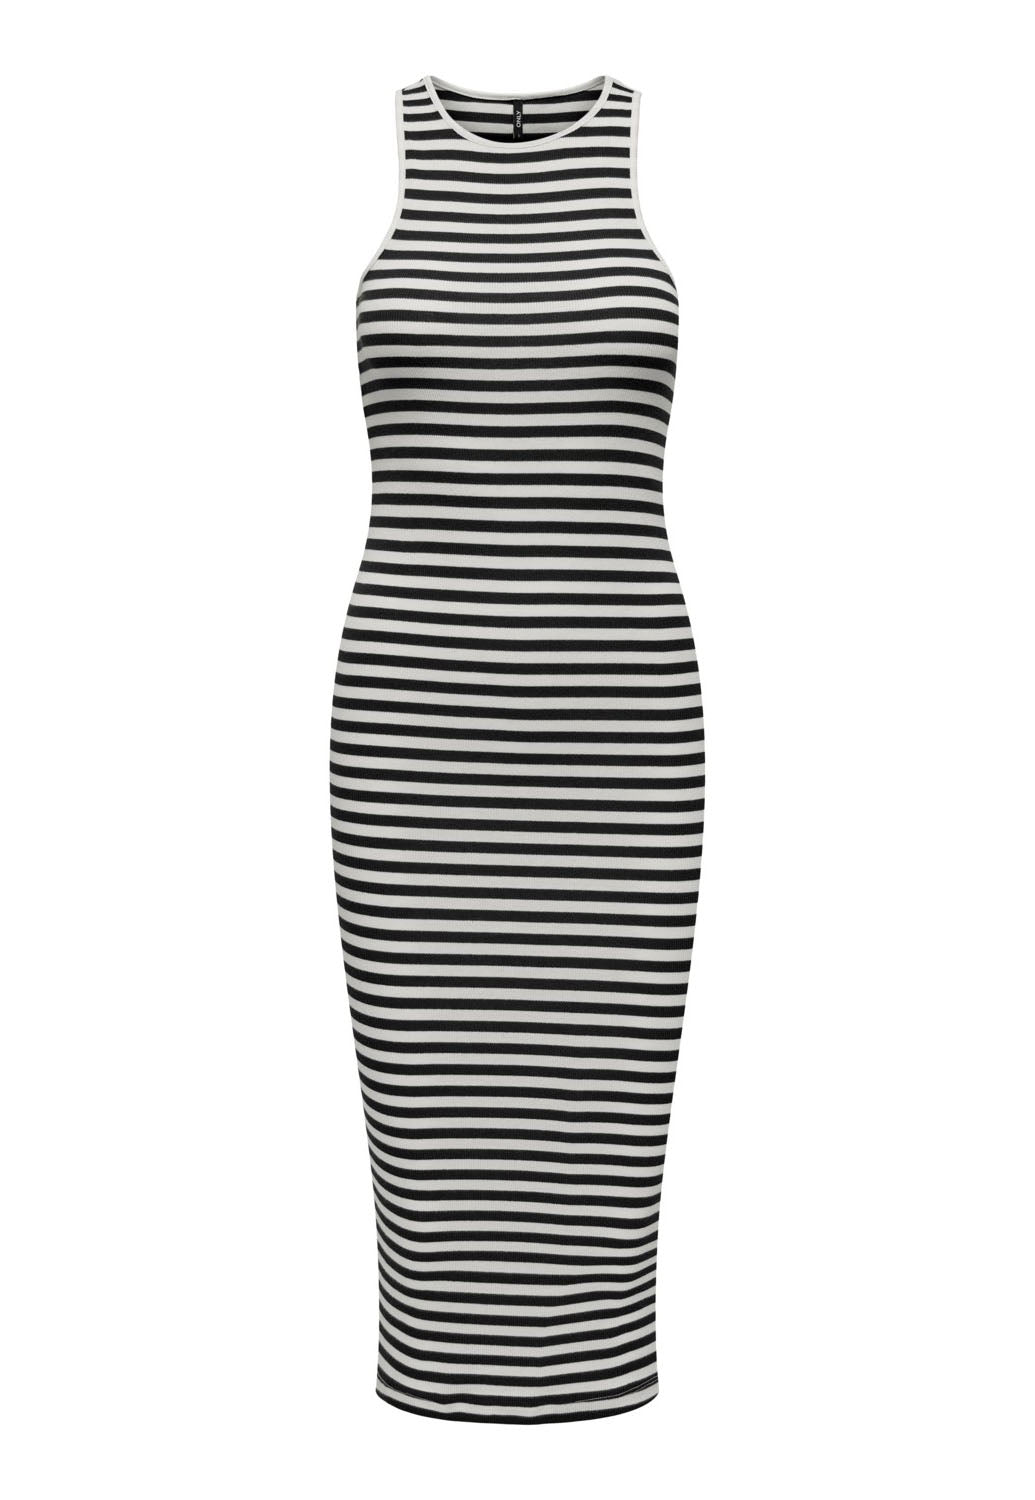 ONLY Any Stripe Ribbed Jersey Midi Sun Dress with Racer Neckline in White & Black - concretebartops